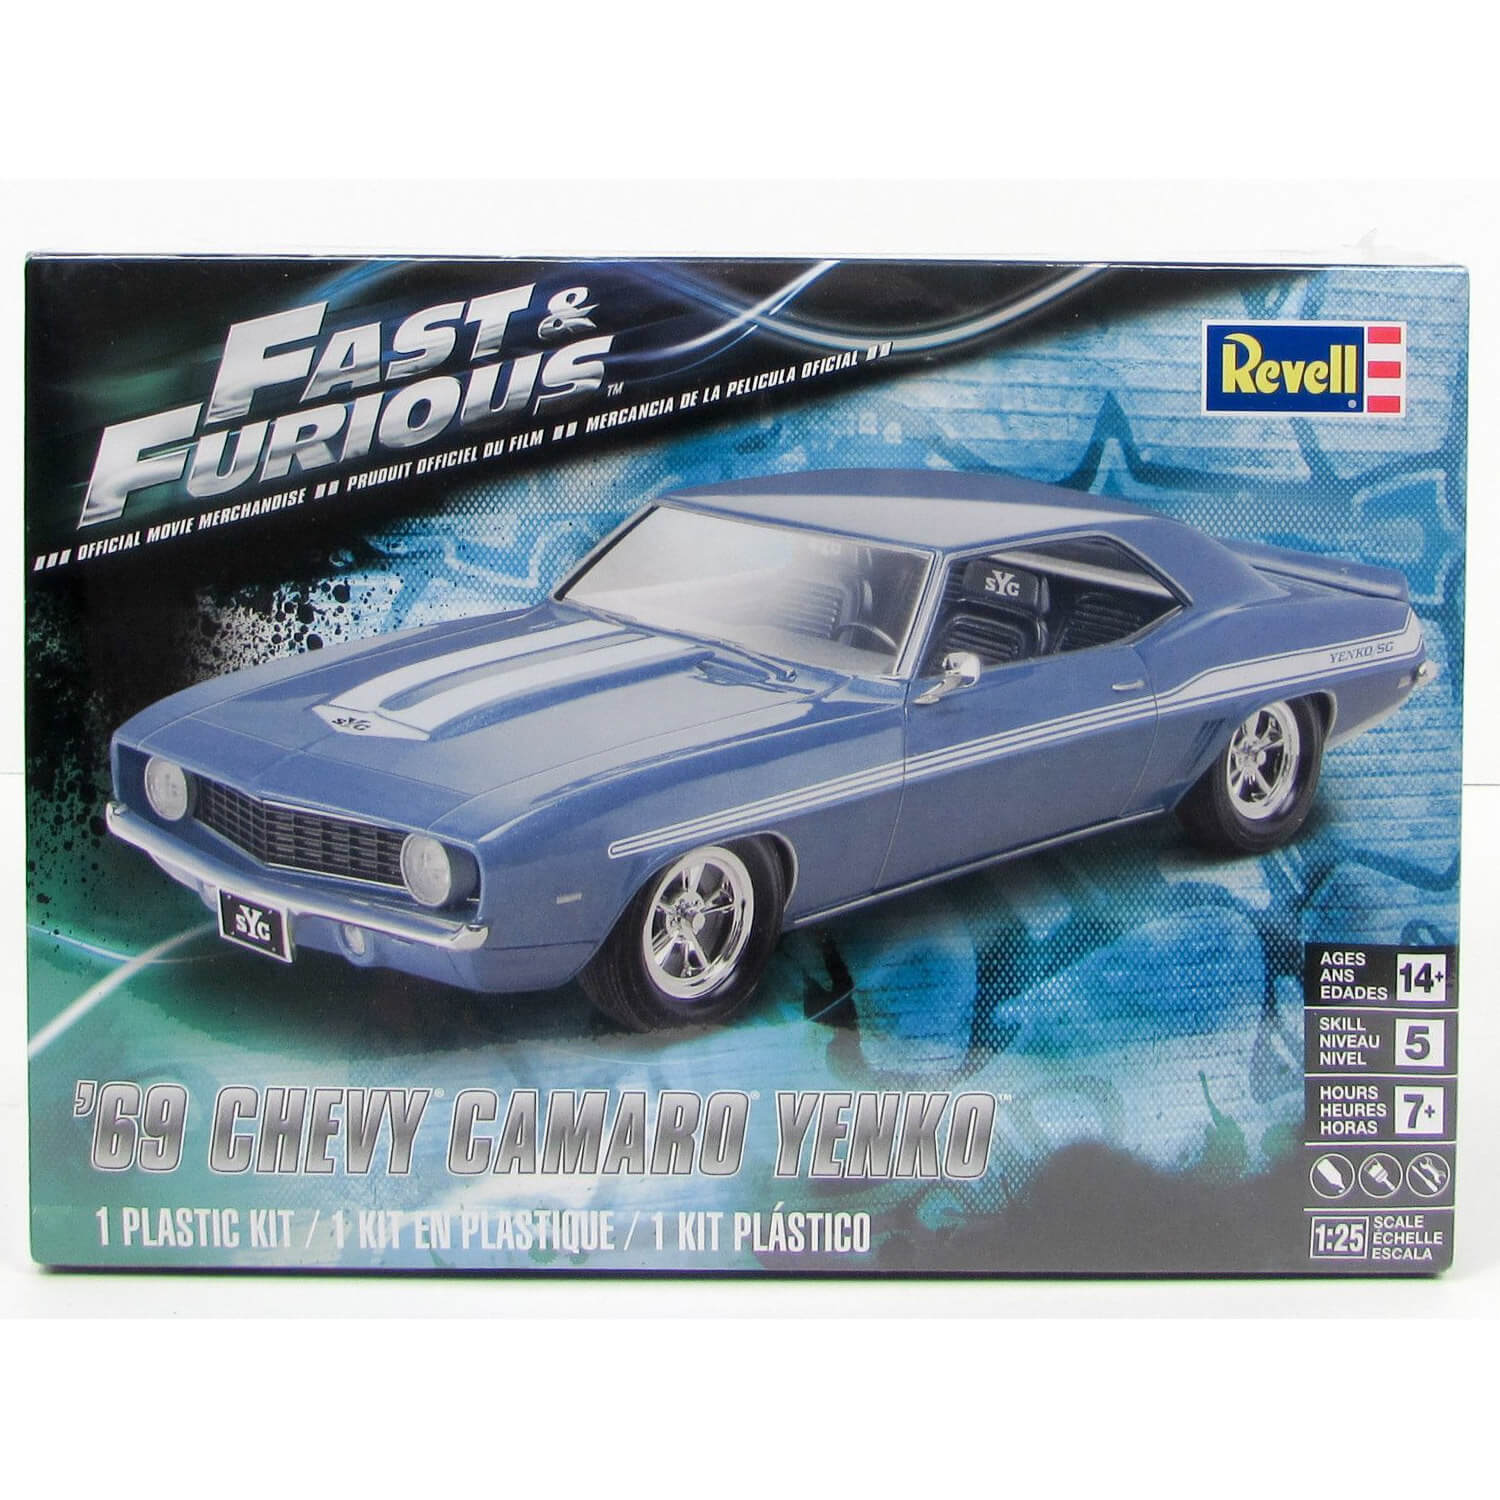 The Fast & Furious - Maquette 1969 Chevy Camaro Yenko - Figurines